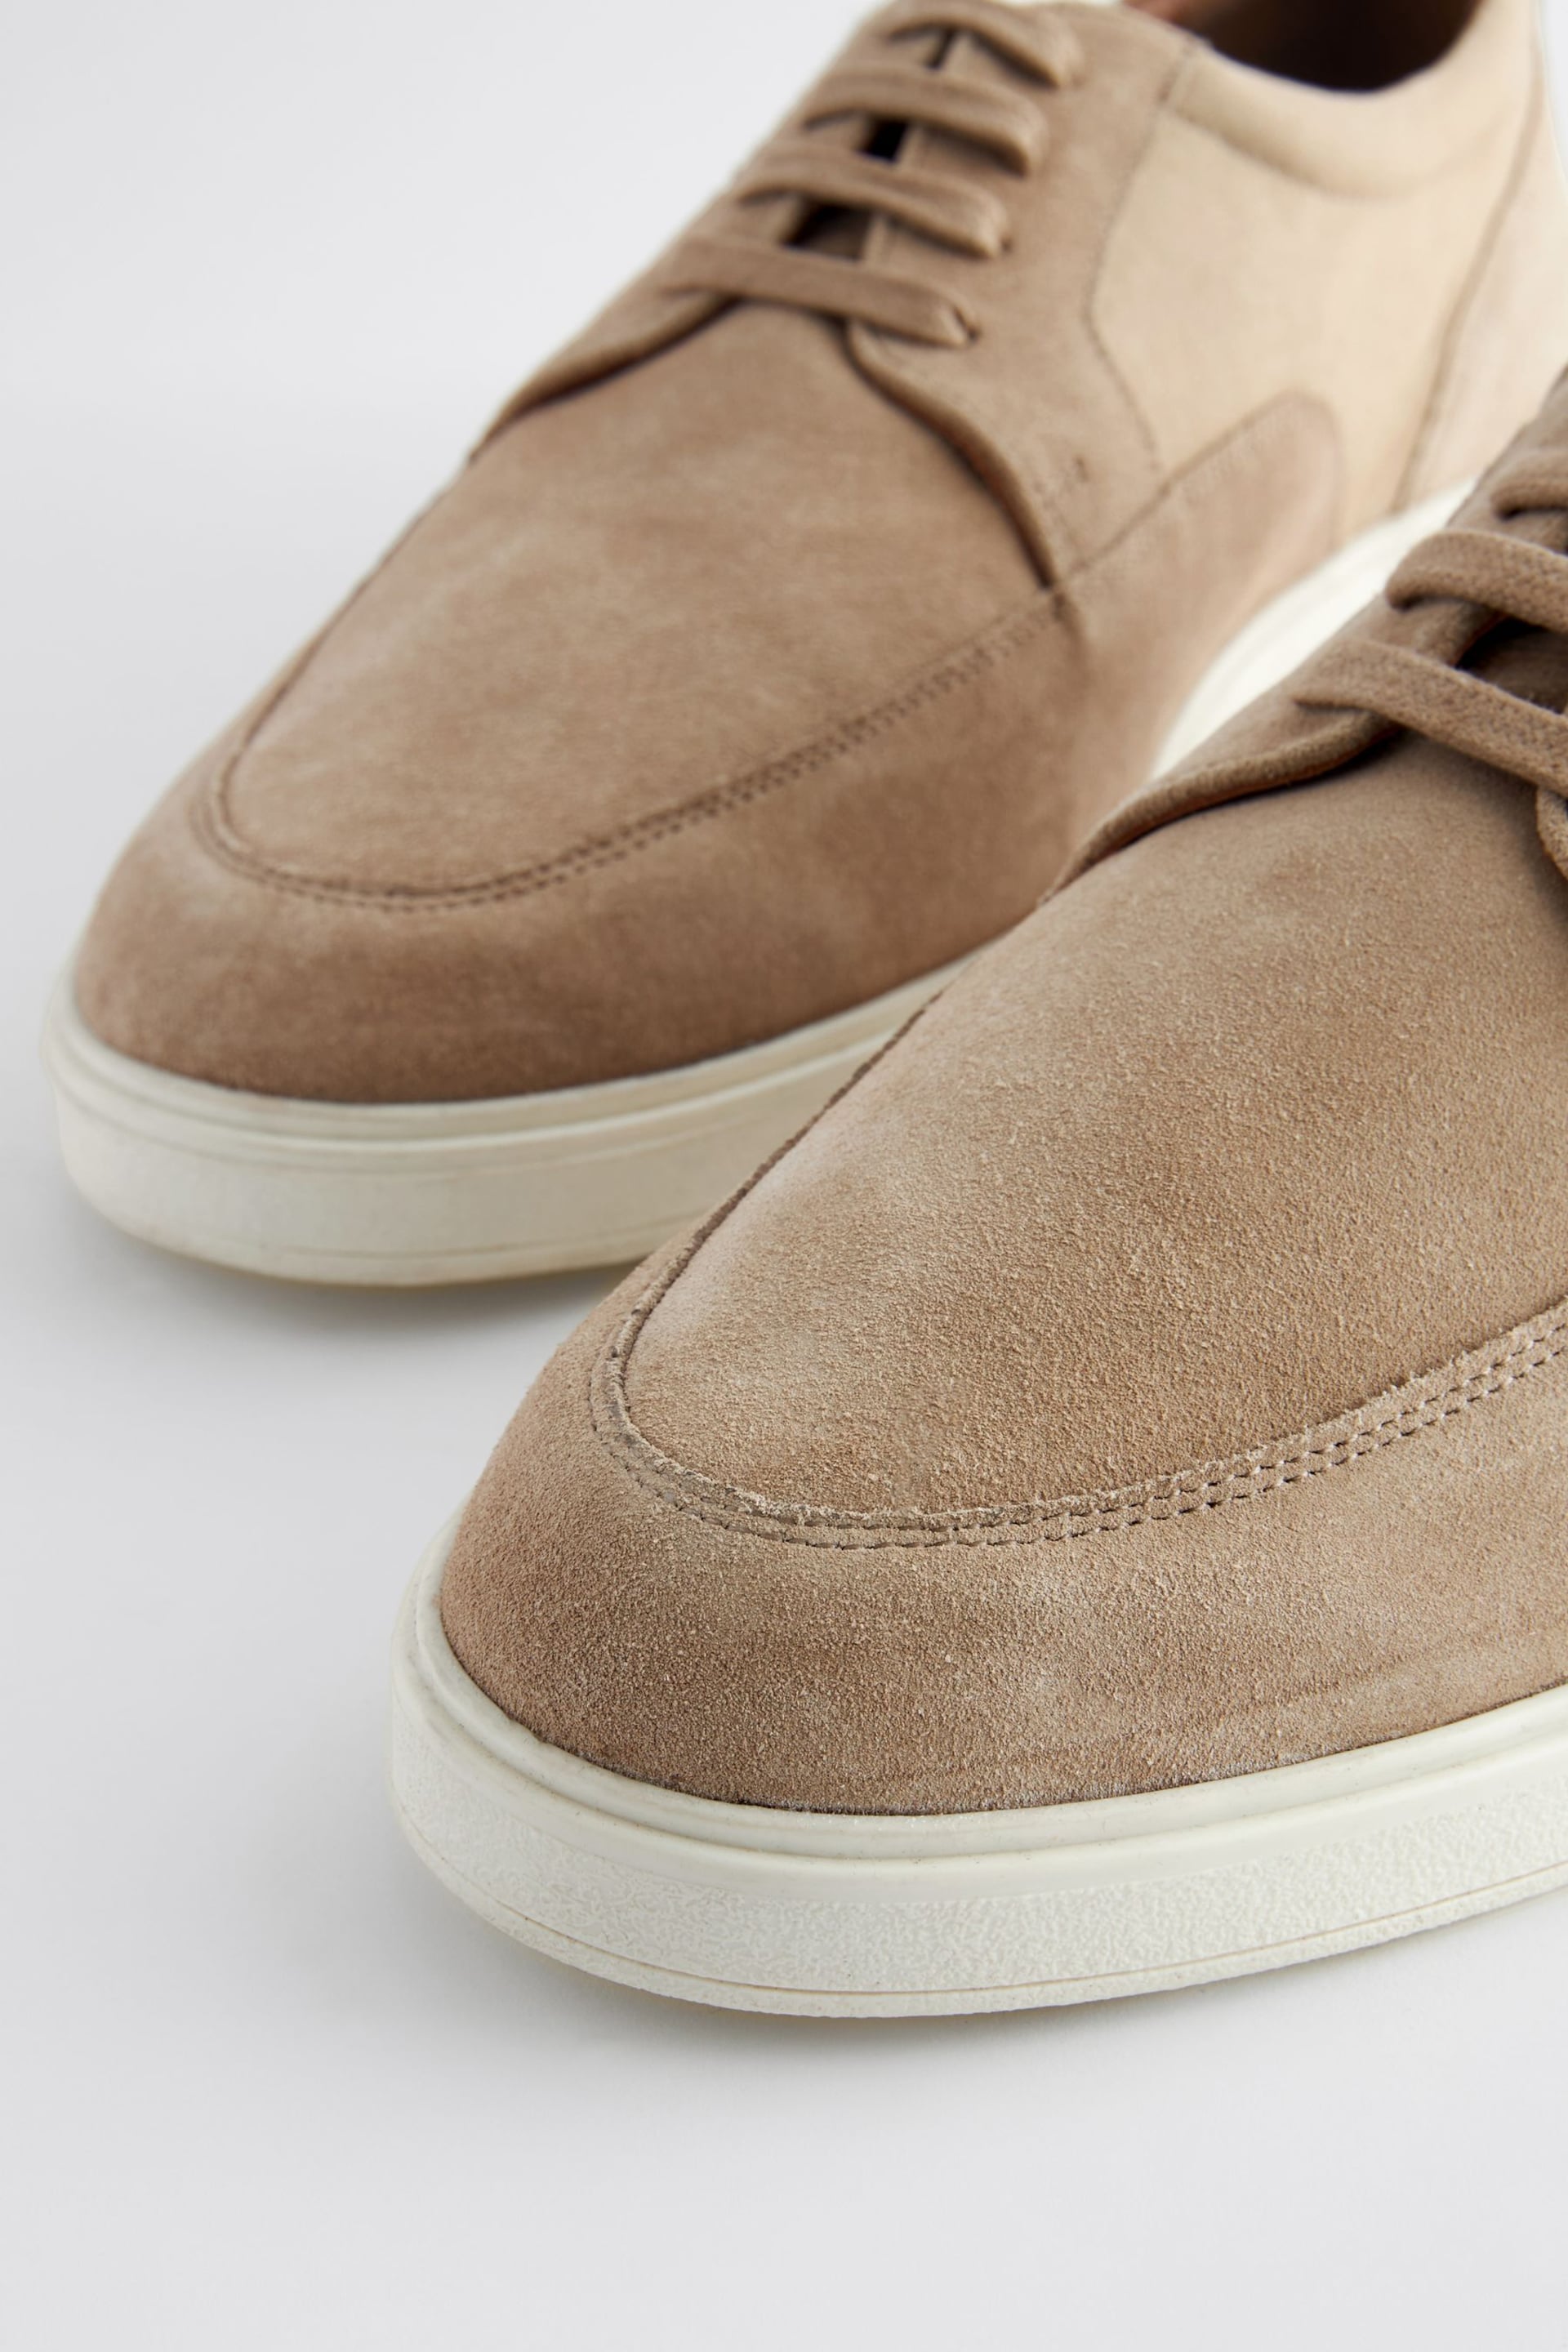 Stone Cream Suede Cupsole Casual Shoes - Image 4 of 7